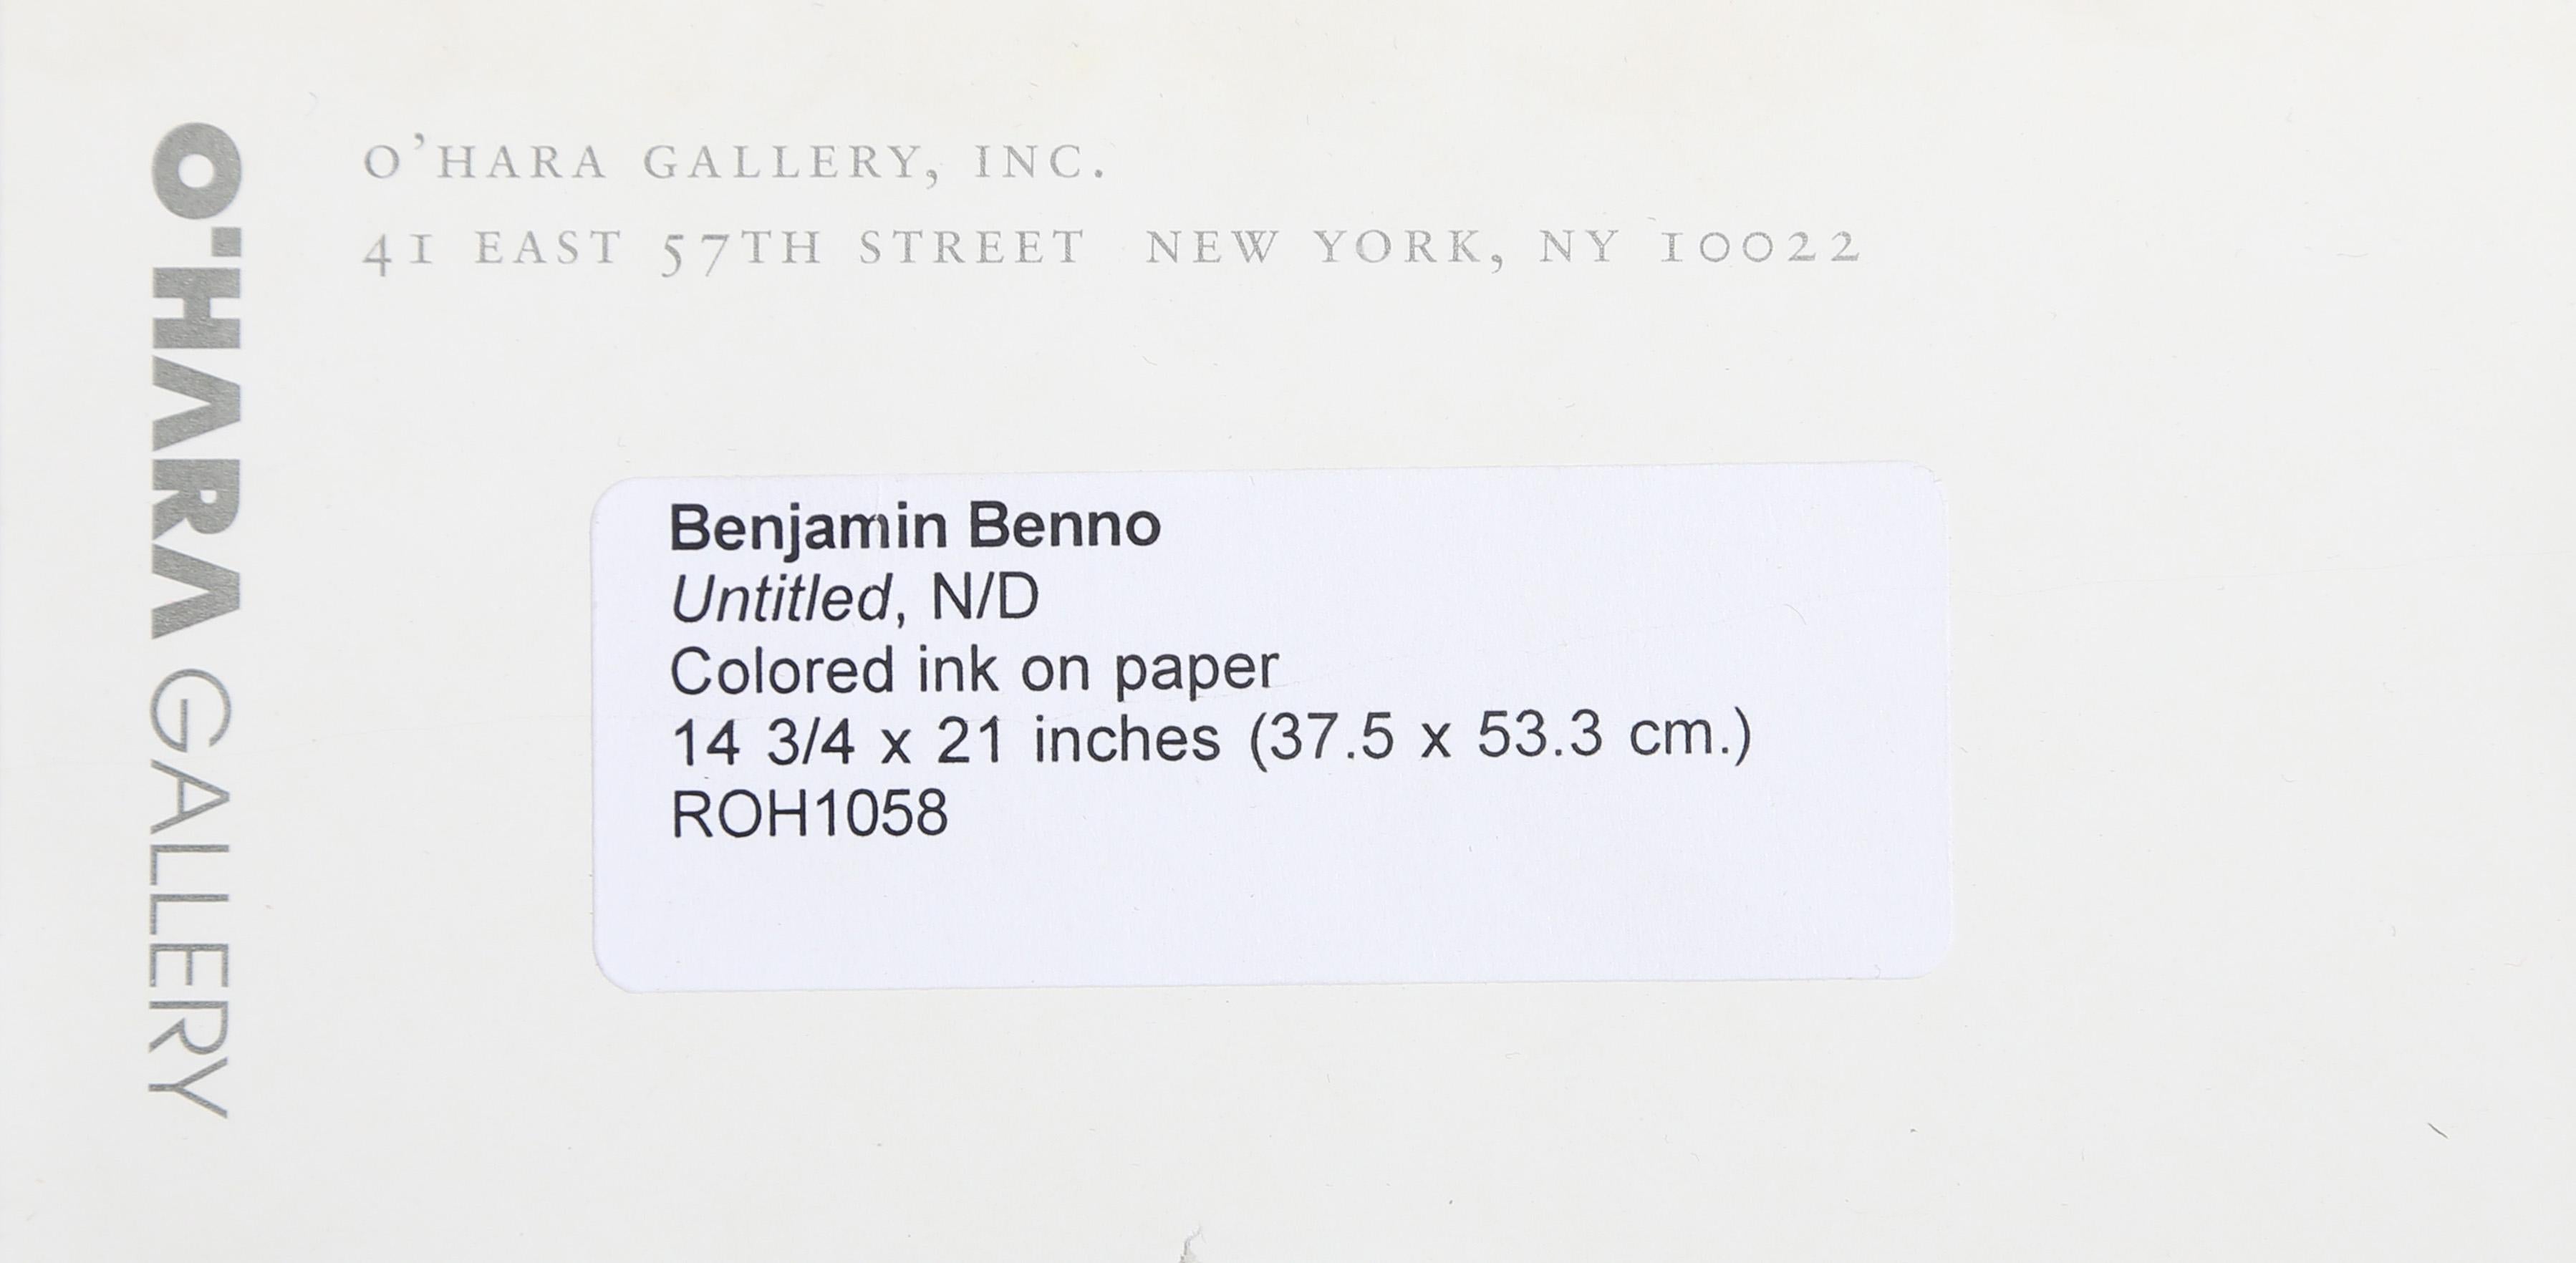 The Amazon
Benjamin Benno, American (1901–1980)
Date: circa 1940
Colored ink on paper
Size: 14.75 x 21 in. (37.47 x 53.34 cm)
Frame Size: 22 x 28 inches